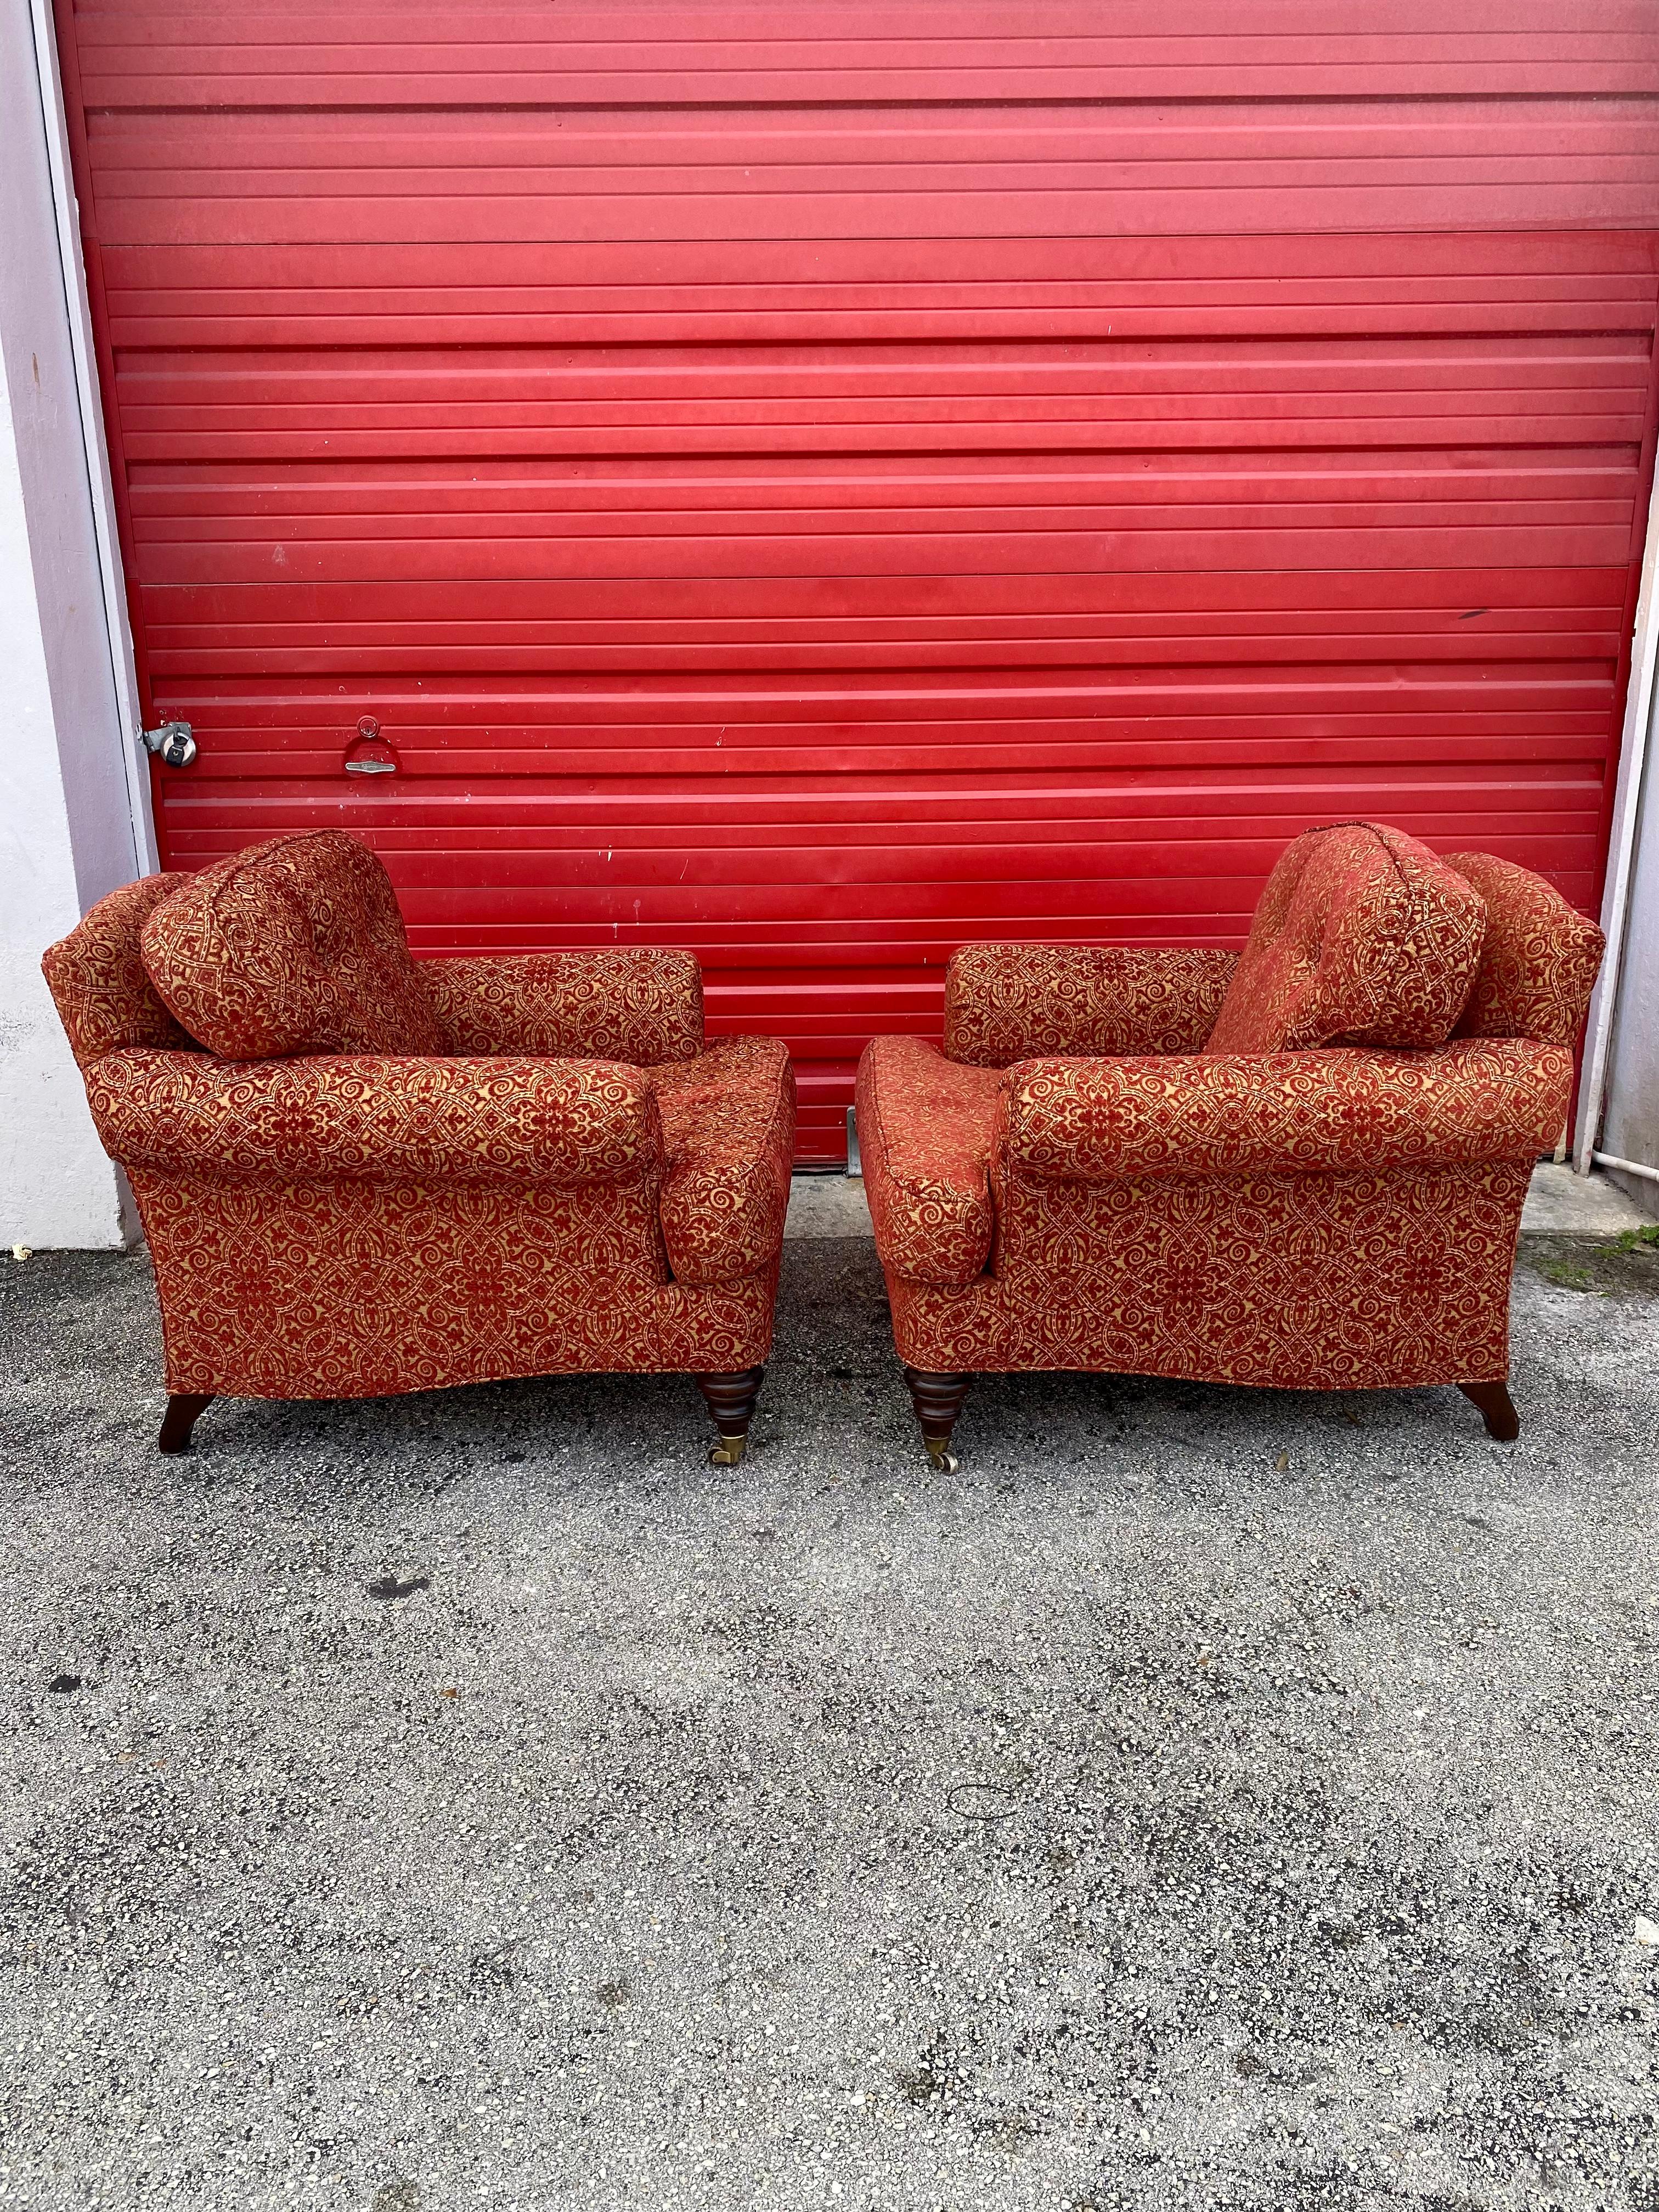 George Smith Damask Down Velvet Castors Armchairs & Ottoman, Set of 3 In Excellent Condition For Sale In Fort Lauderdale, FL